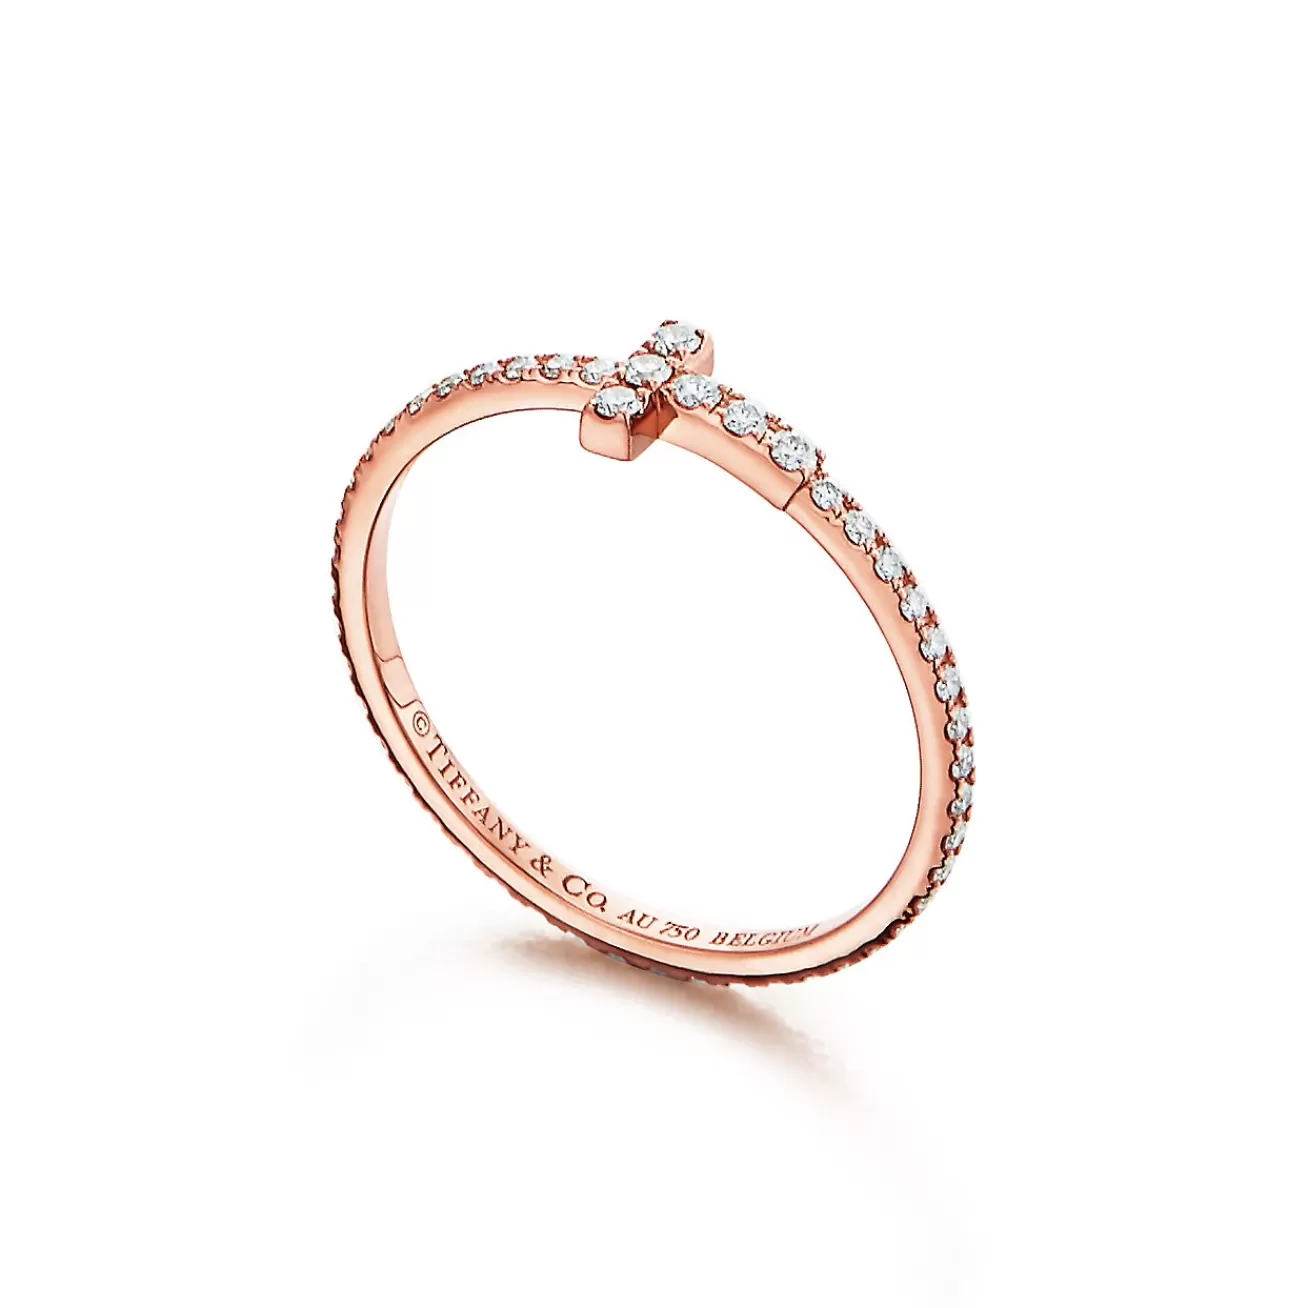 Tiffany & Co. Tiffany T diamond wire band ring in 18k rose gold. | ^ Rings | Men's Jewelry